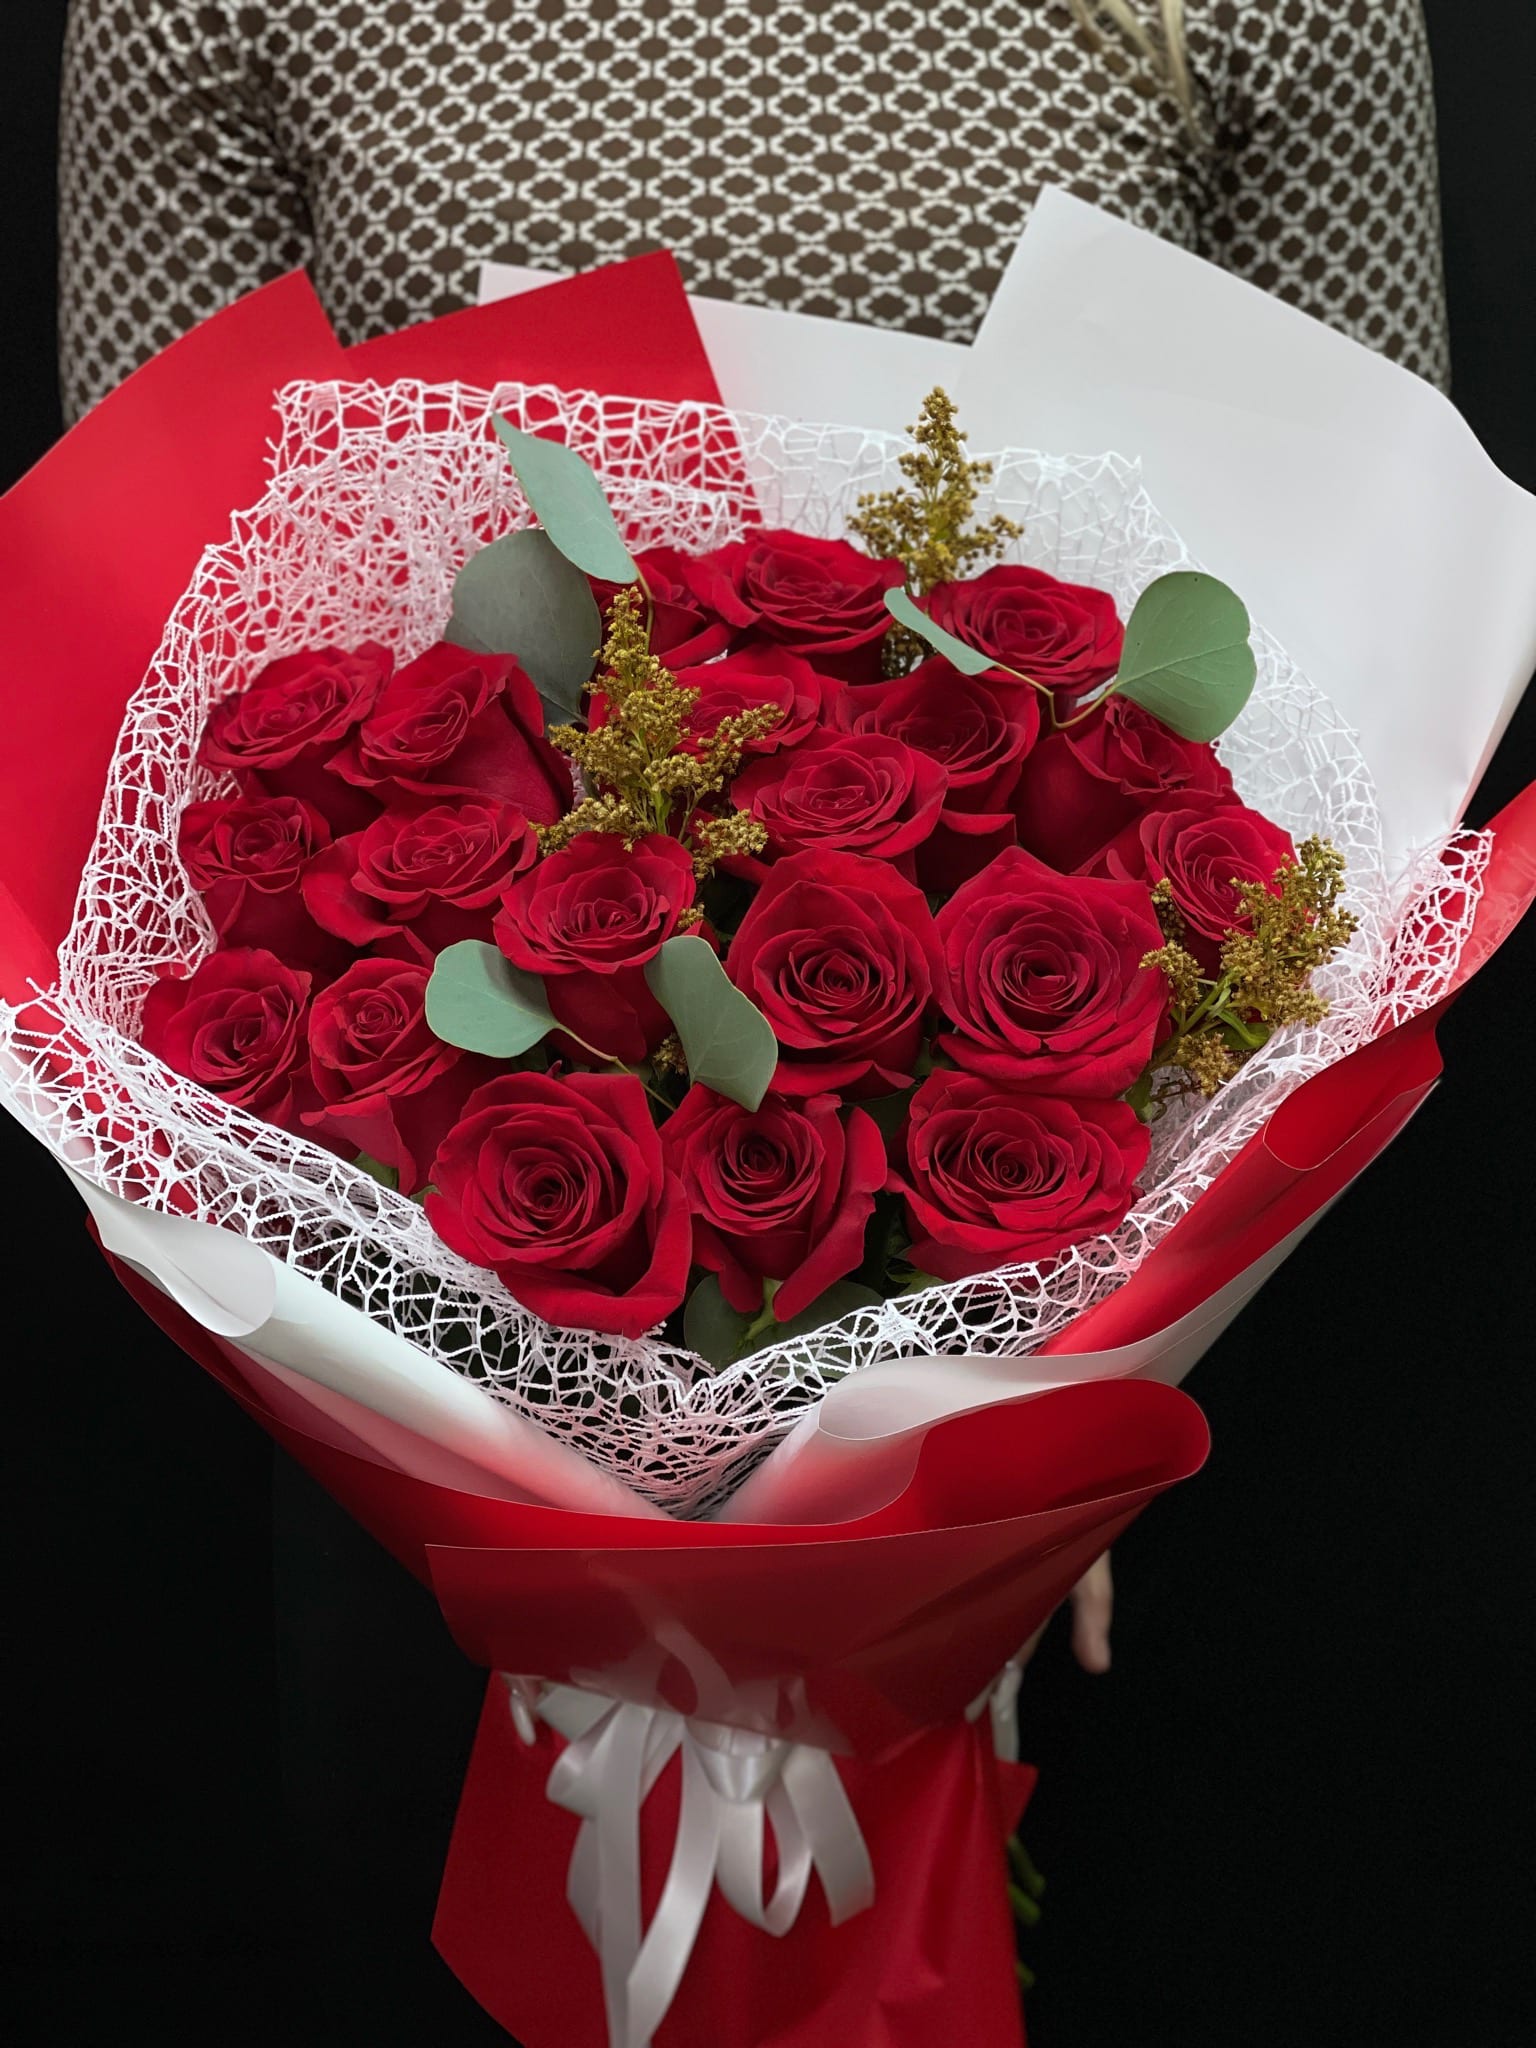 Red roses 2 dozens - Will be delivered, approximately as pictured